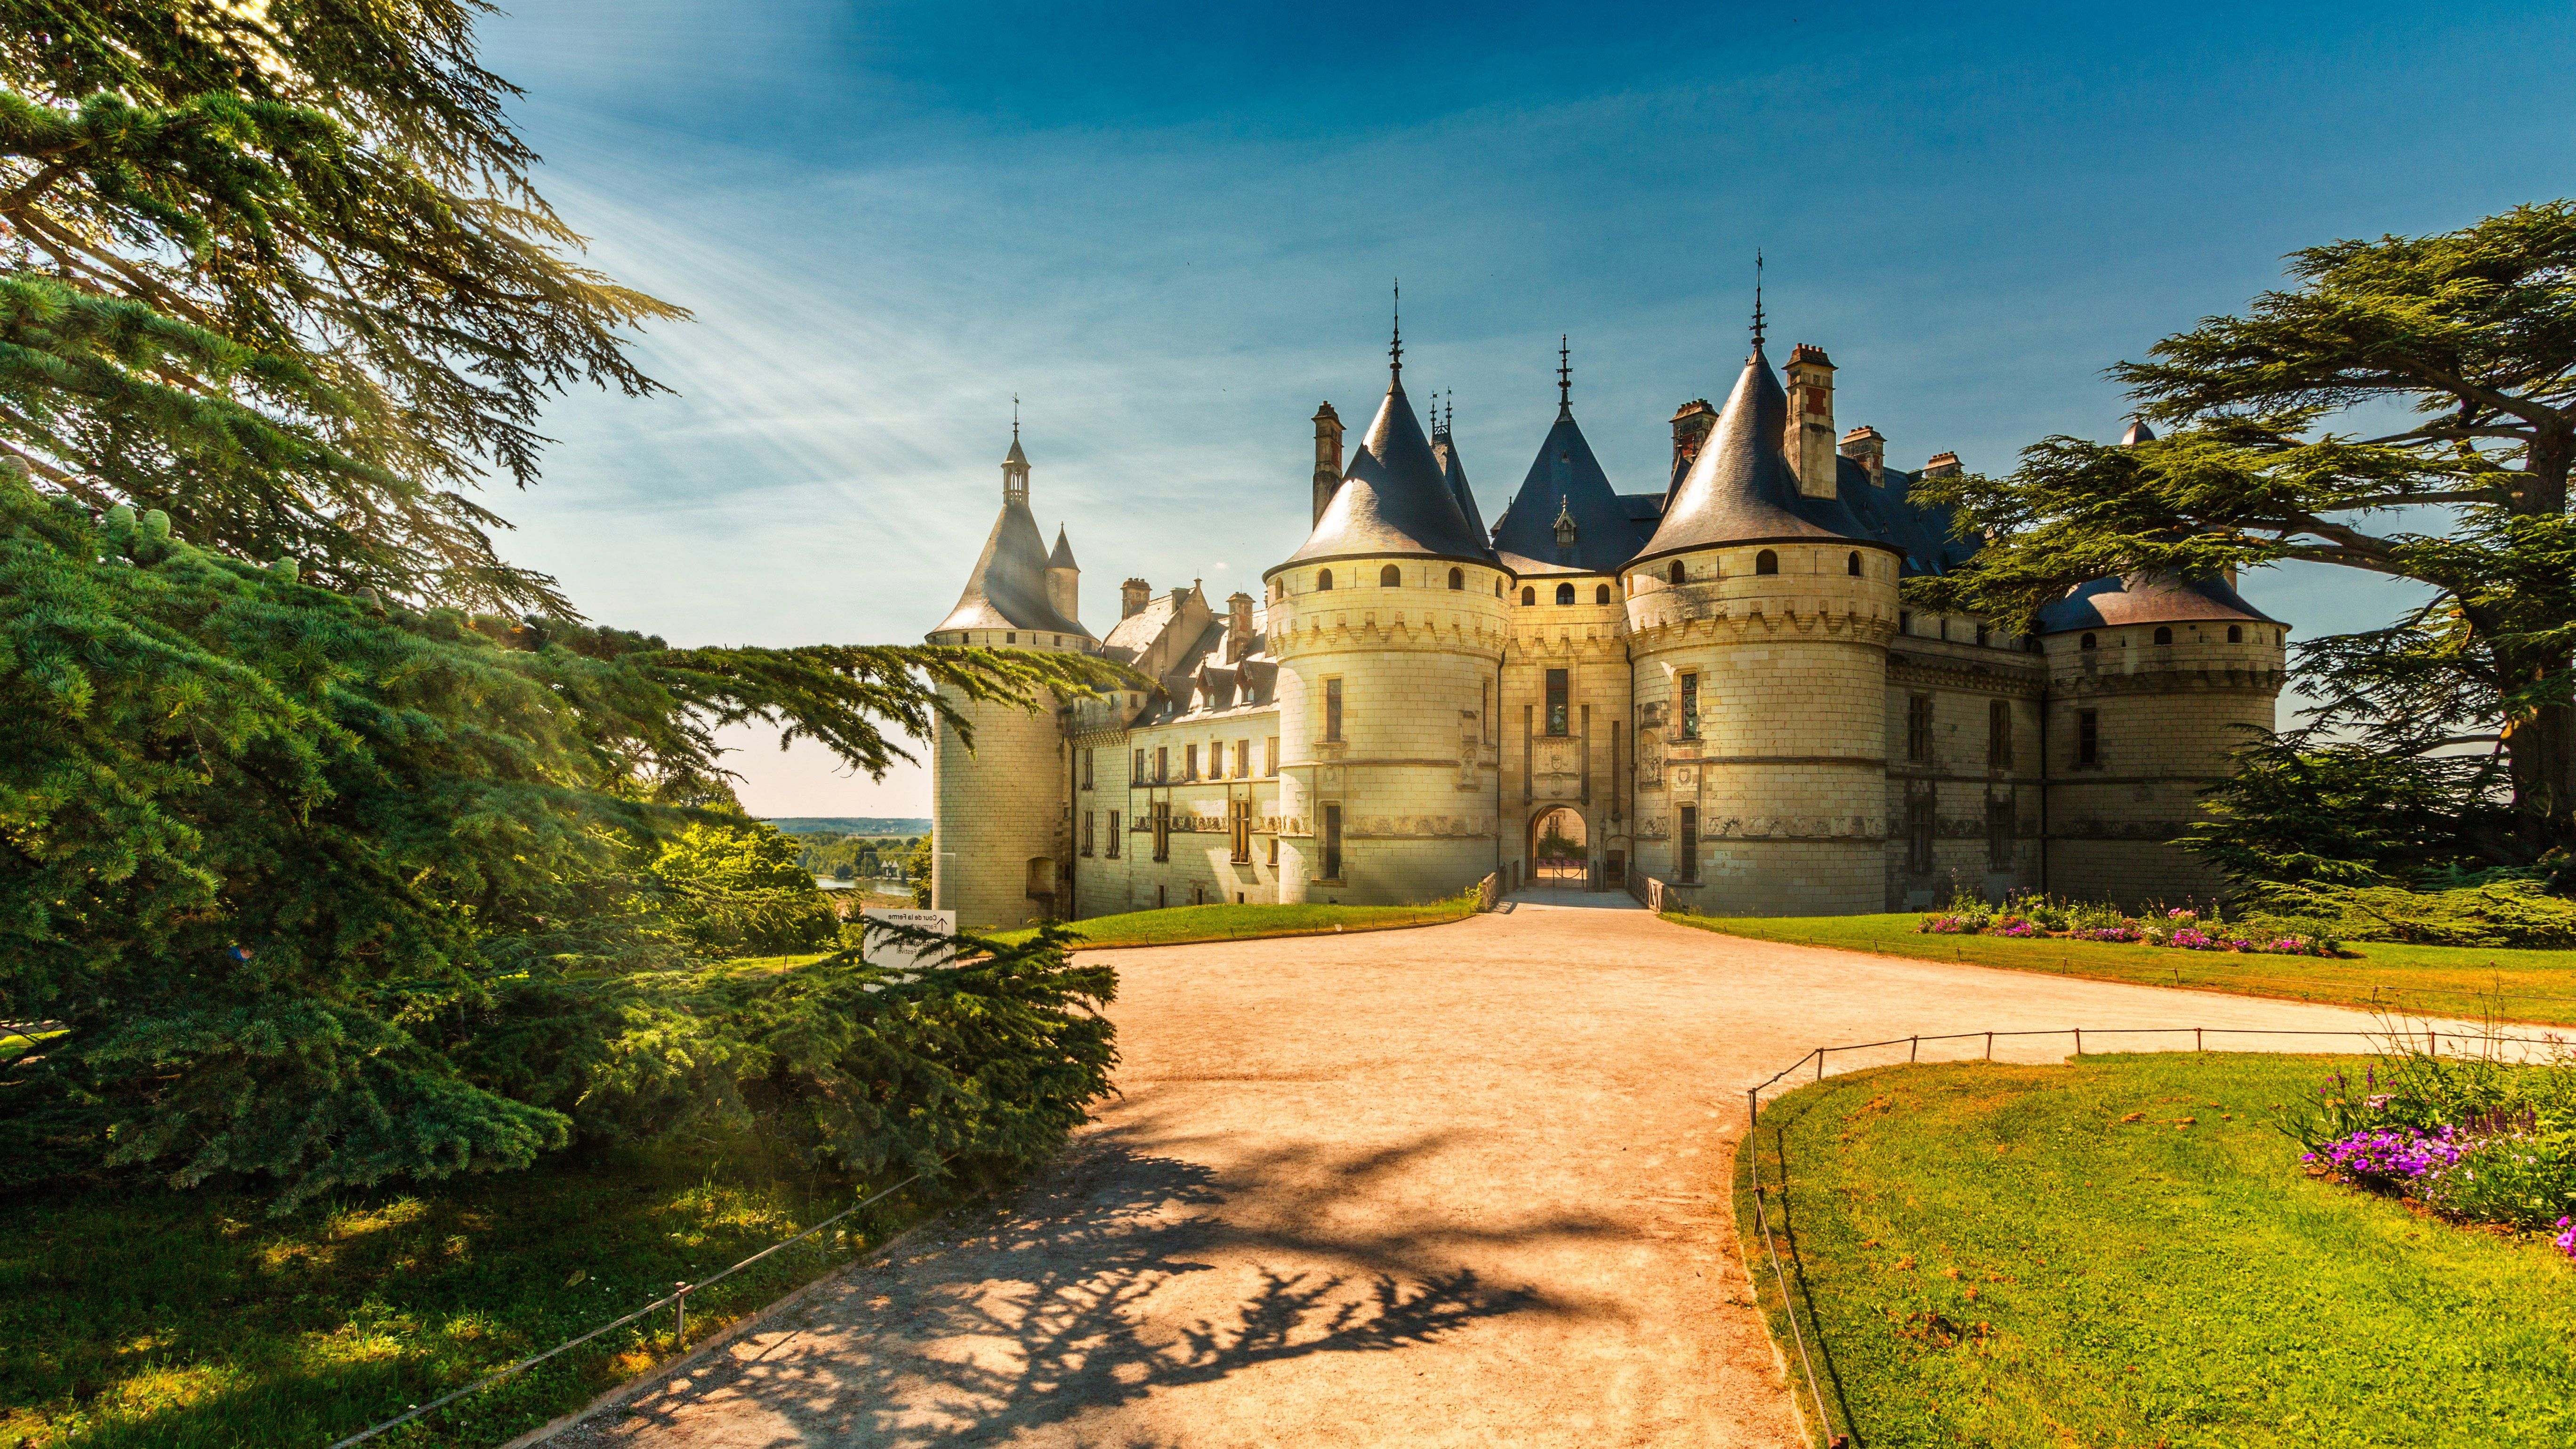 Chateau 4K wallpaper for your desktop or mobile screen free and easy to download